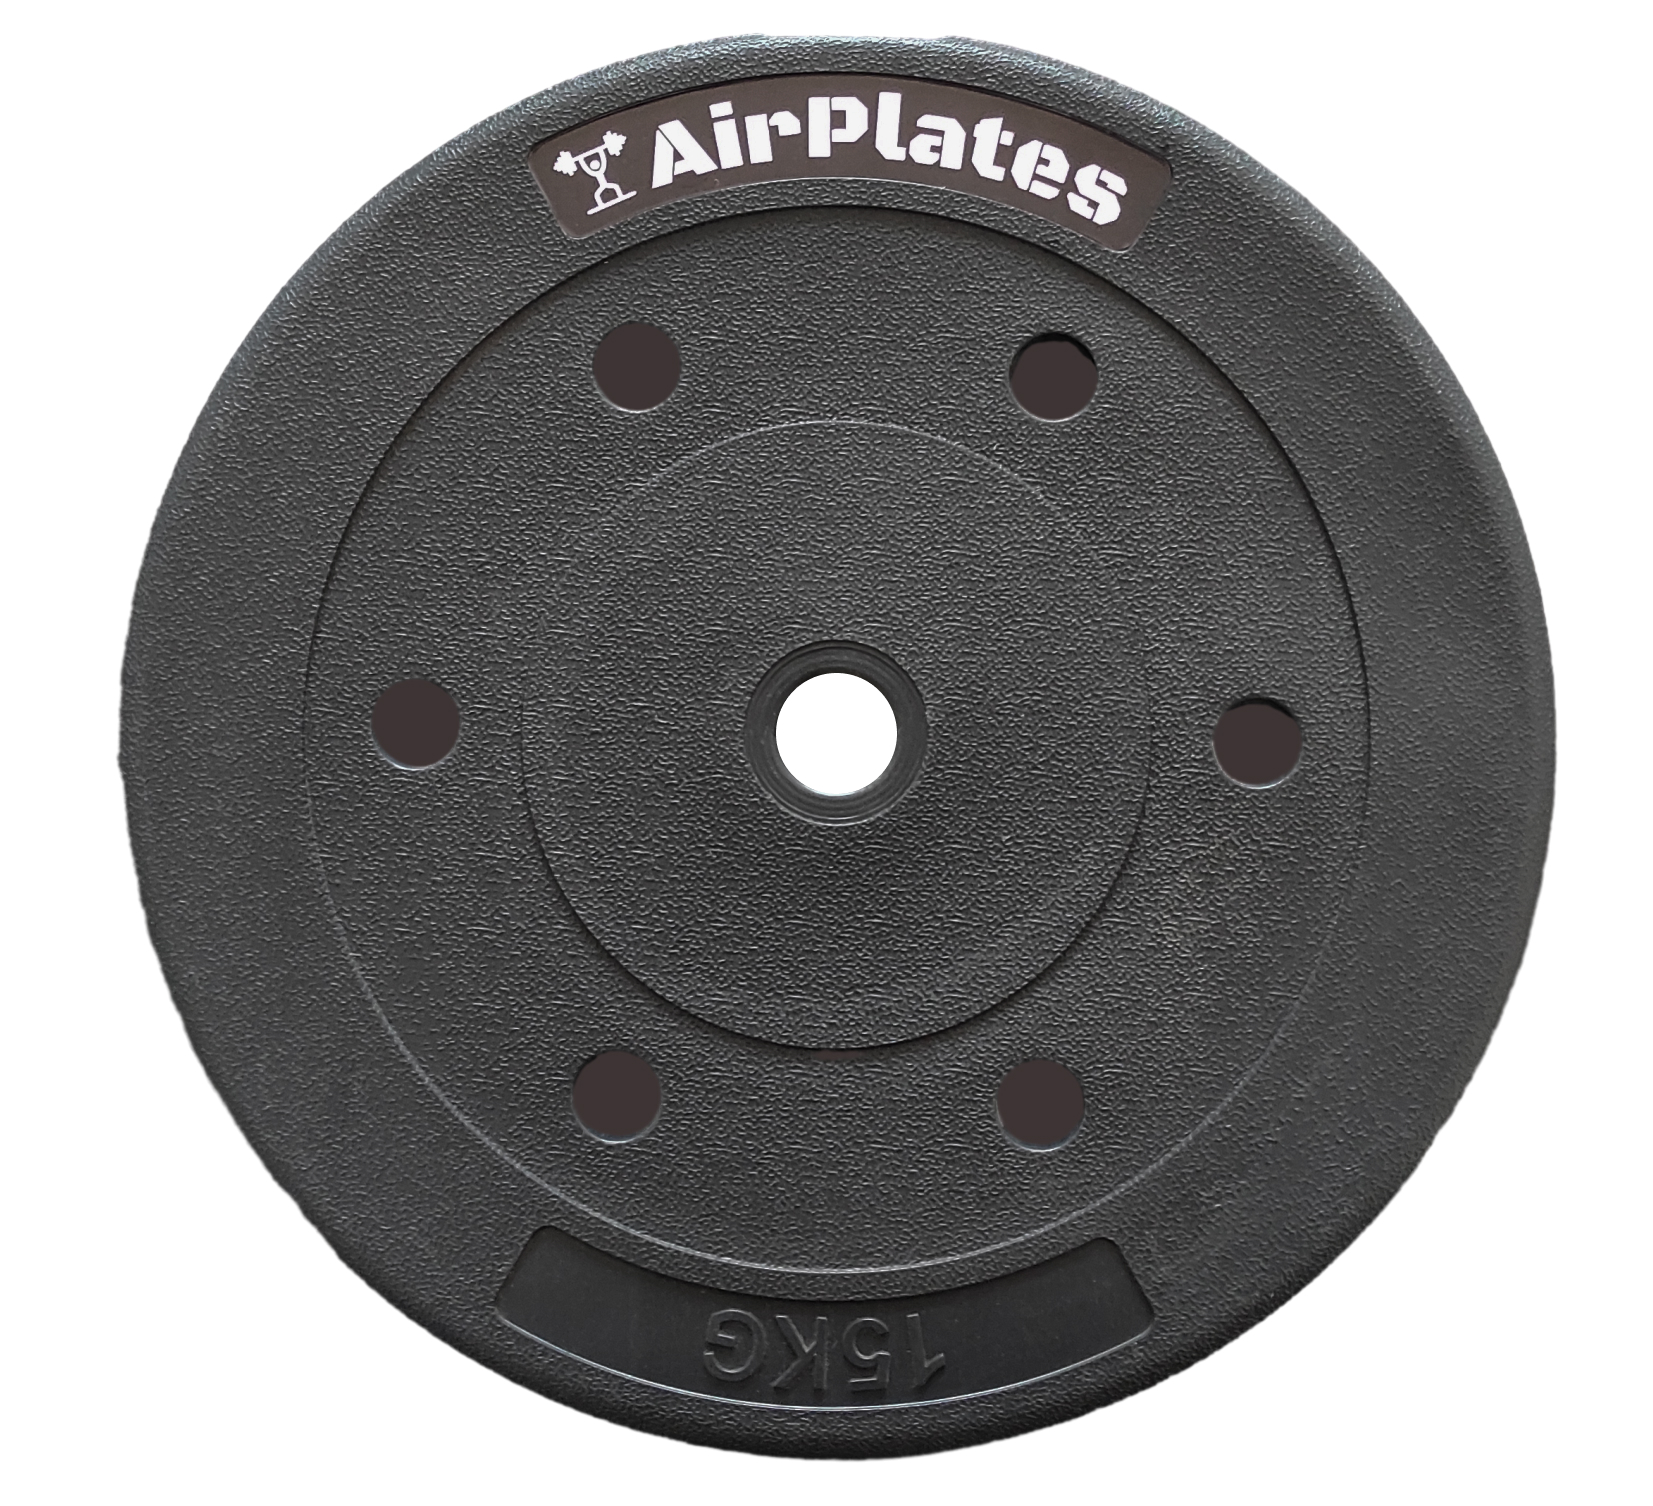 AirPlates weight plate